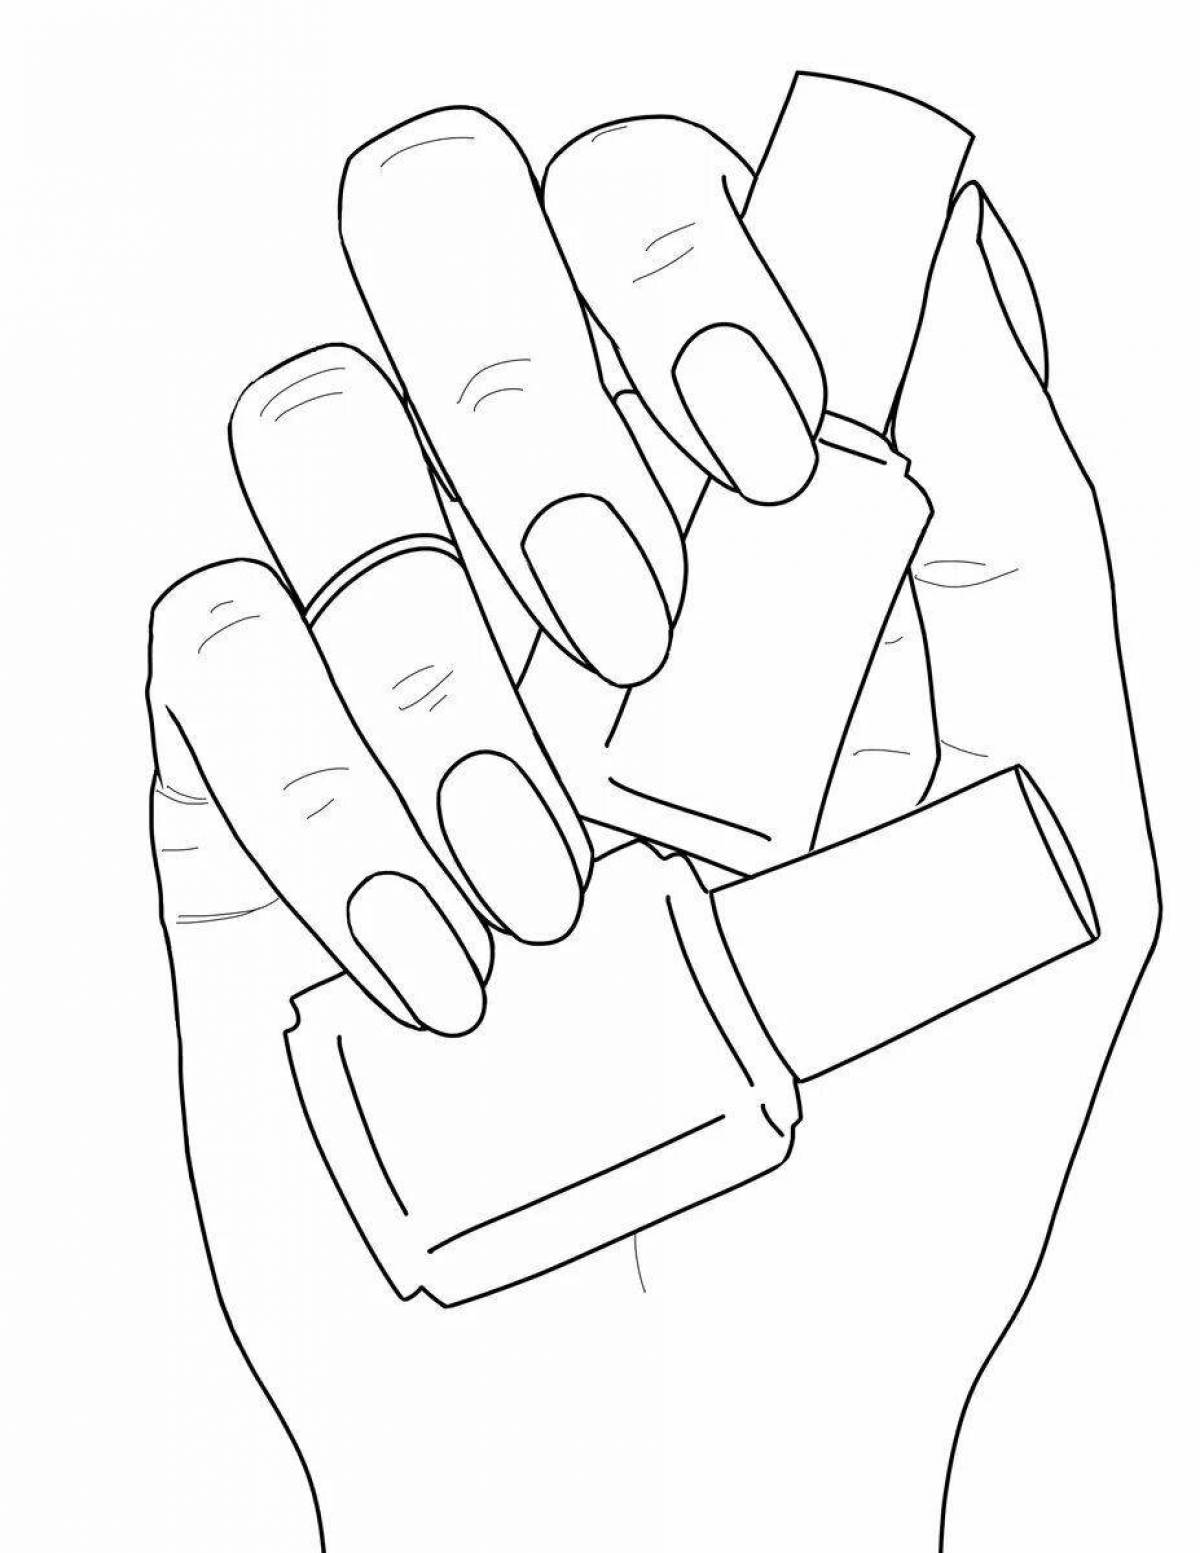 Coloring beautiful manicure for nails